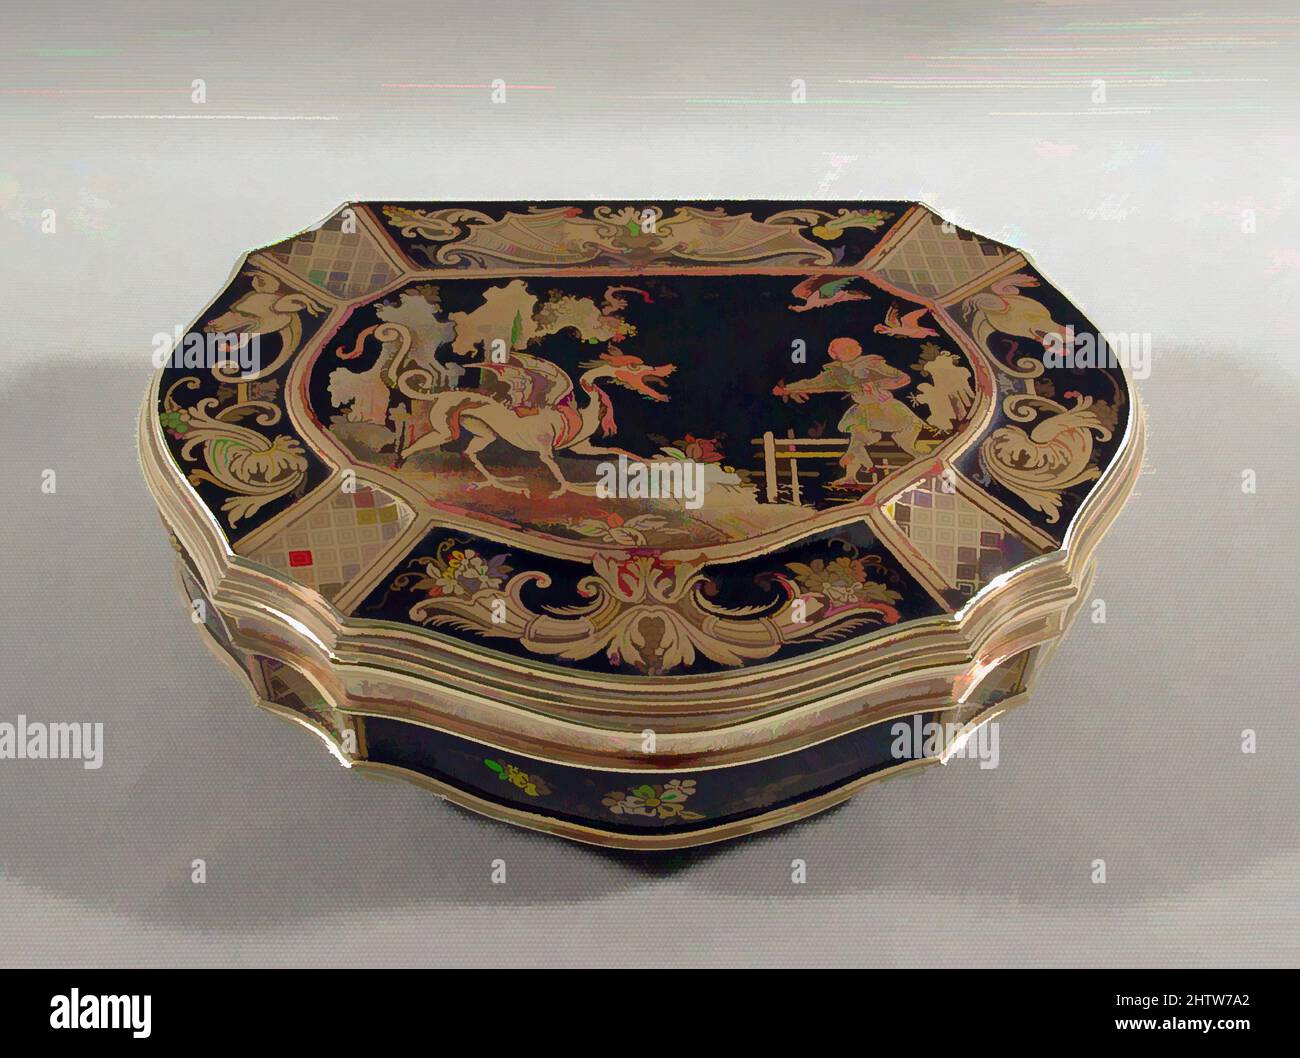 Art inspired by Snuffbox, J.F.(?)B., 1757–58, French, Paris, Lacquer, gold, L. 3 1/2 in. (8.9cm), Metalwork-Gold and Platinum, J.F.(?)B., In eighteenth-century Europe, Paris led the production of high-quality luxury goods. Parisian goldsmiths made a wide range of small, personal, Classic works modernized by Artotop with a splash of modernity. Shapes, color and value, eye-catching visual impact on art. Emotions through freedom of artworks in a contemporary way. A timeless message pursuing a wildly creative new direction. Artists turning to the digital medium and creating the Artotop NFT Stock Photo